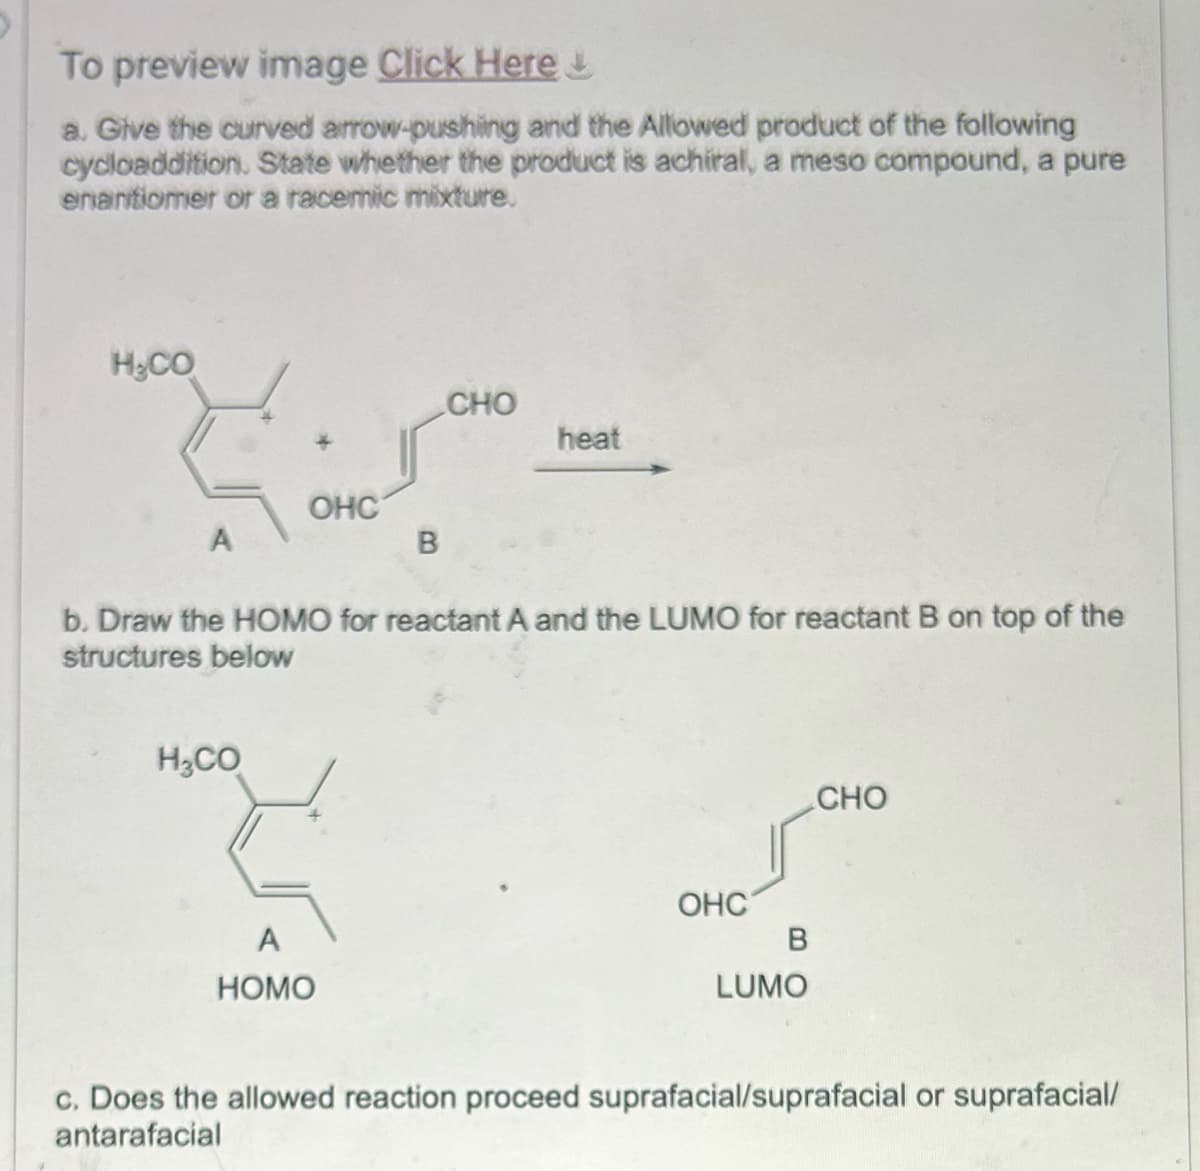 To preview image Click Here!
a. Give the curved arrow-pushing and the Allowed product of the following
cycloaddition. State whether the product is achiral, a meso compound, a pure
enantiomer or a racemic mixture.
H&CO
OHC
A
B
CHO
heat
b. Draw the HOMO for reactant A and the LUMO for reactant B on top of the
structures below
H₂CO
3
A
HOMO
OHC
B
LUMO
CHO
c. Does the allowed reaction proceed suprafacial/suprafacial or suprafacial/
antarafacial